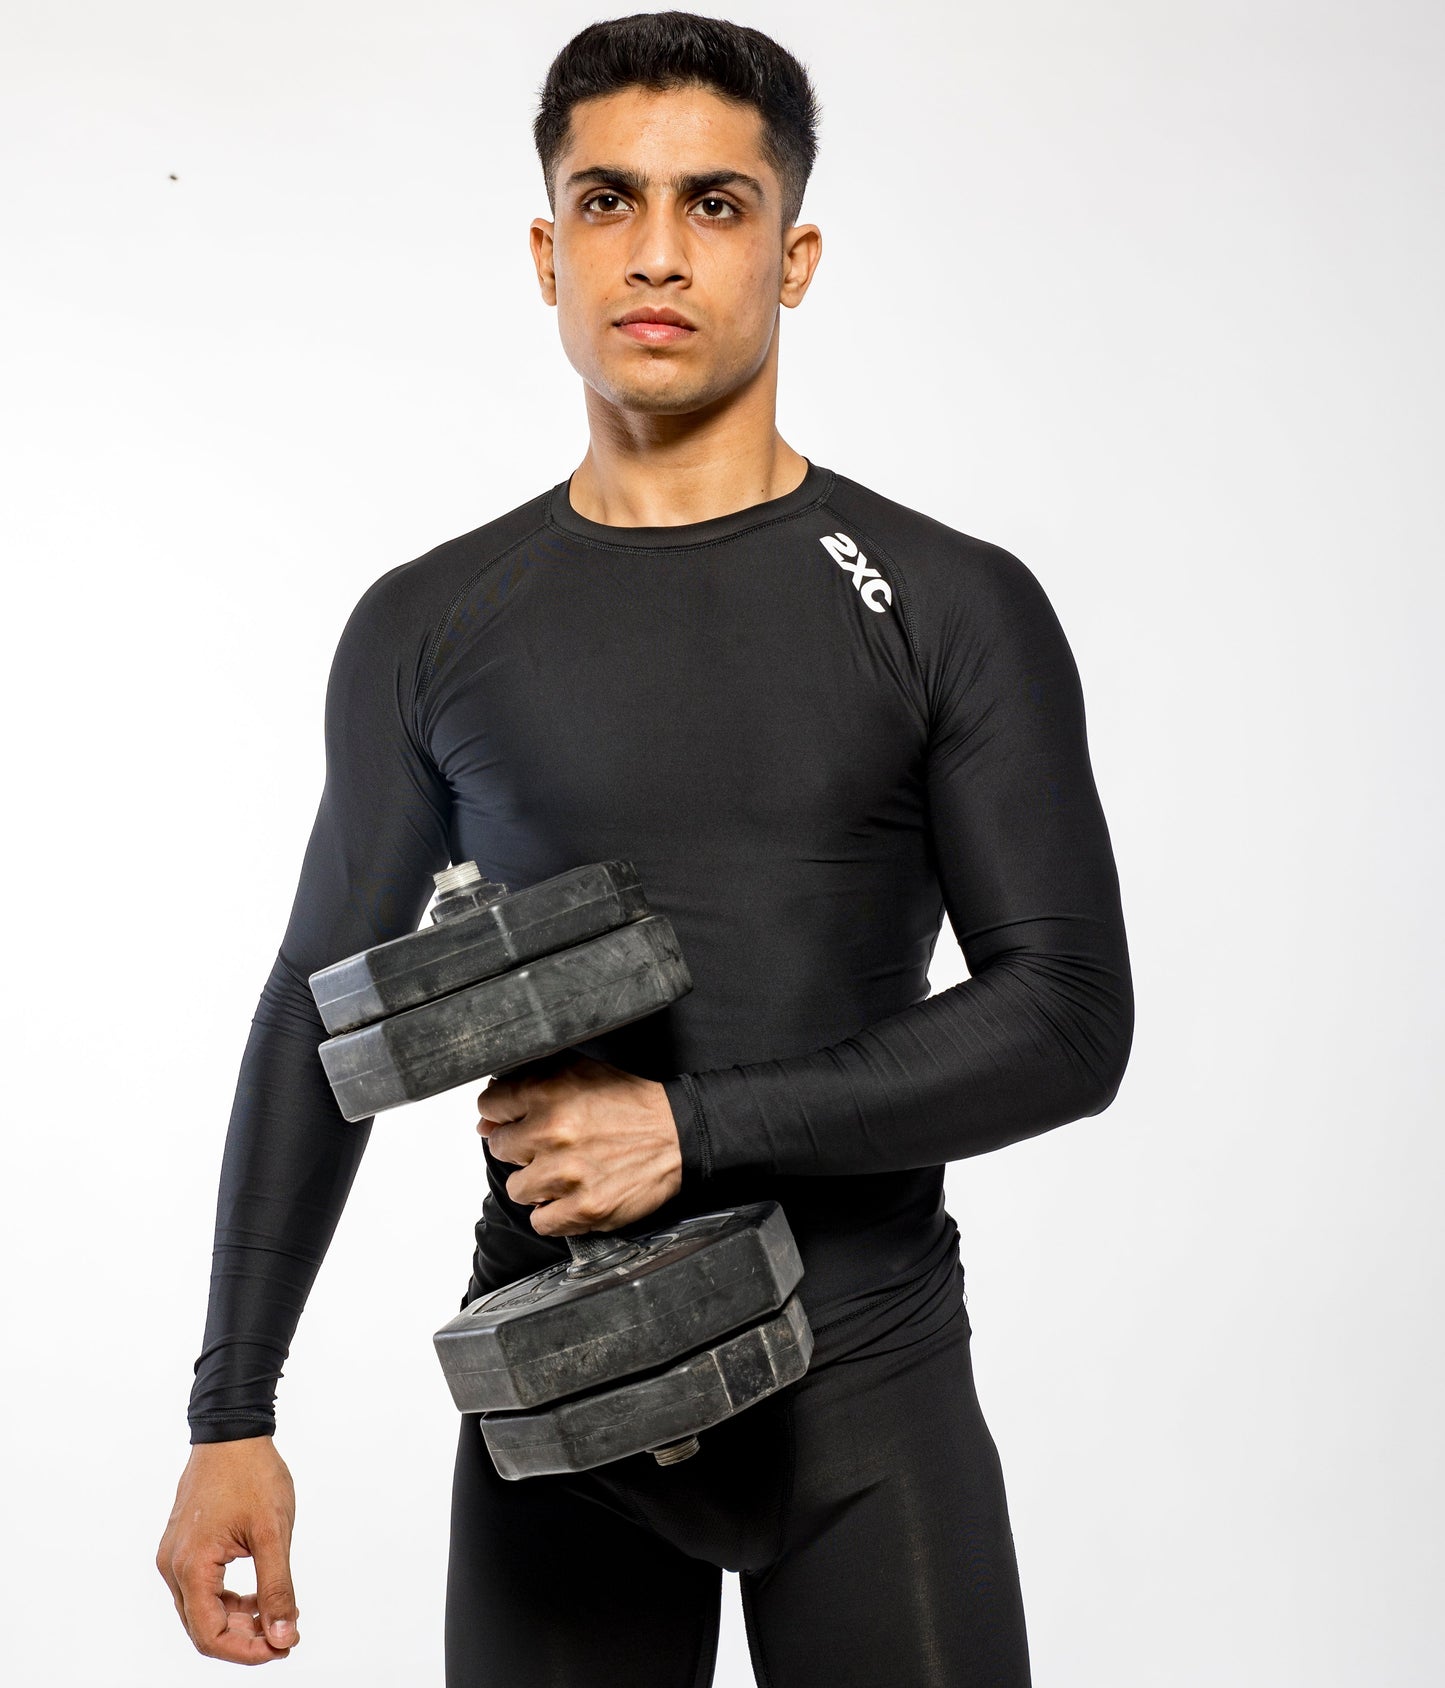 BLACK FULL SLEEVE RUNNING/WORKOUT COMPRESSION